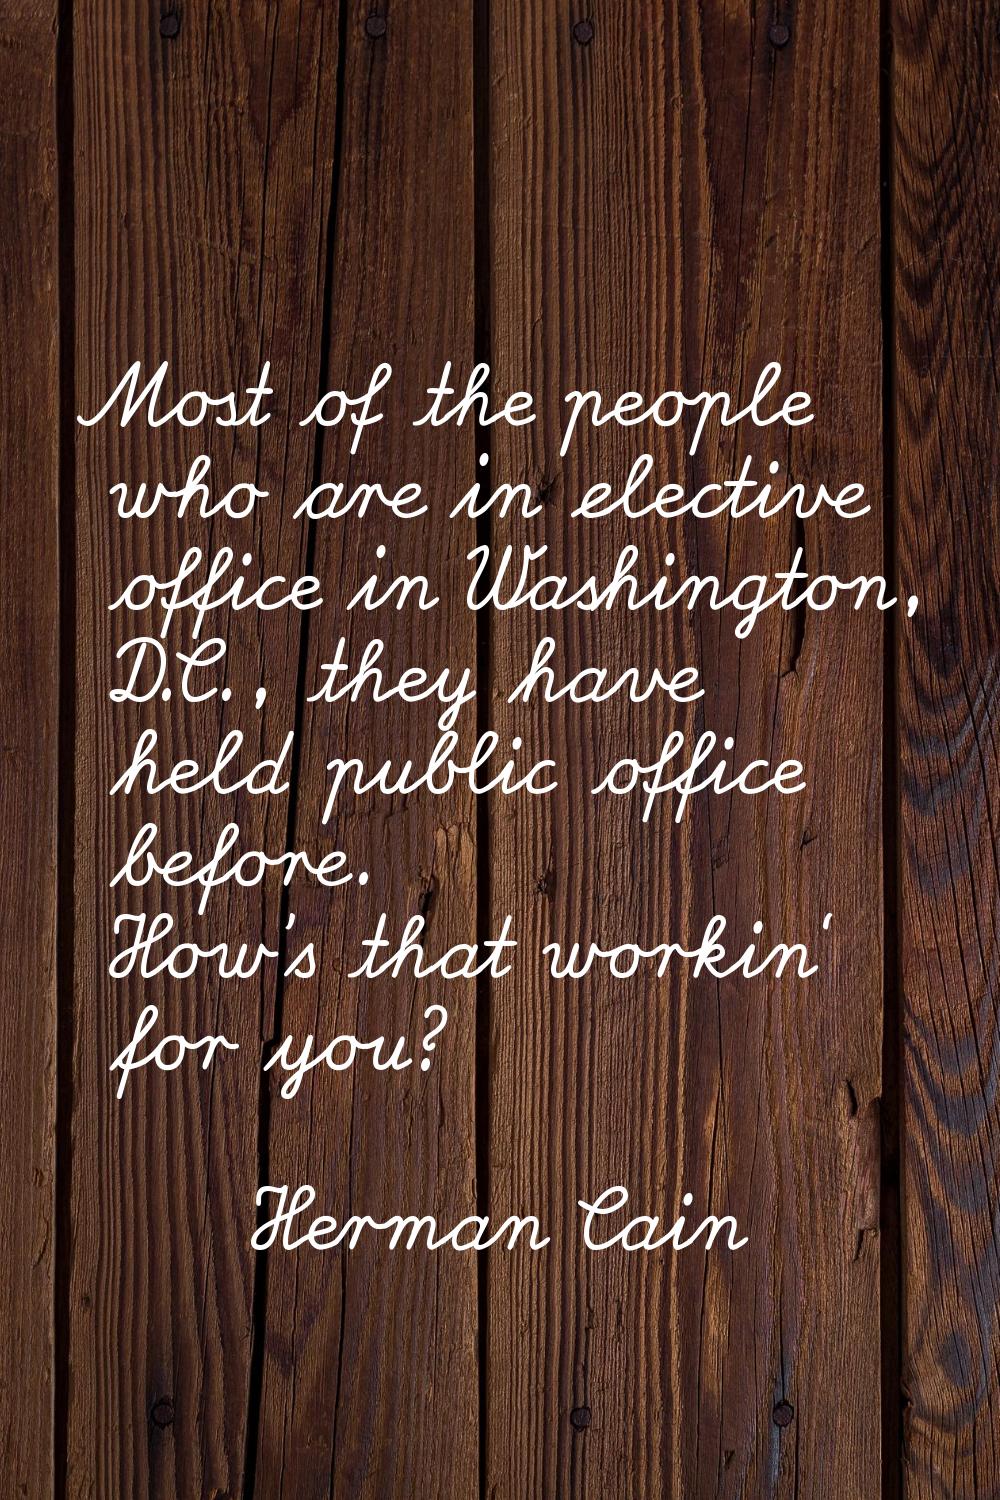 Most of the people who are in elective office in Washington, D.C., they have held public office bef